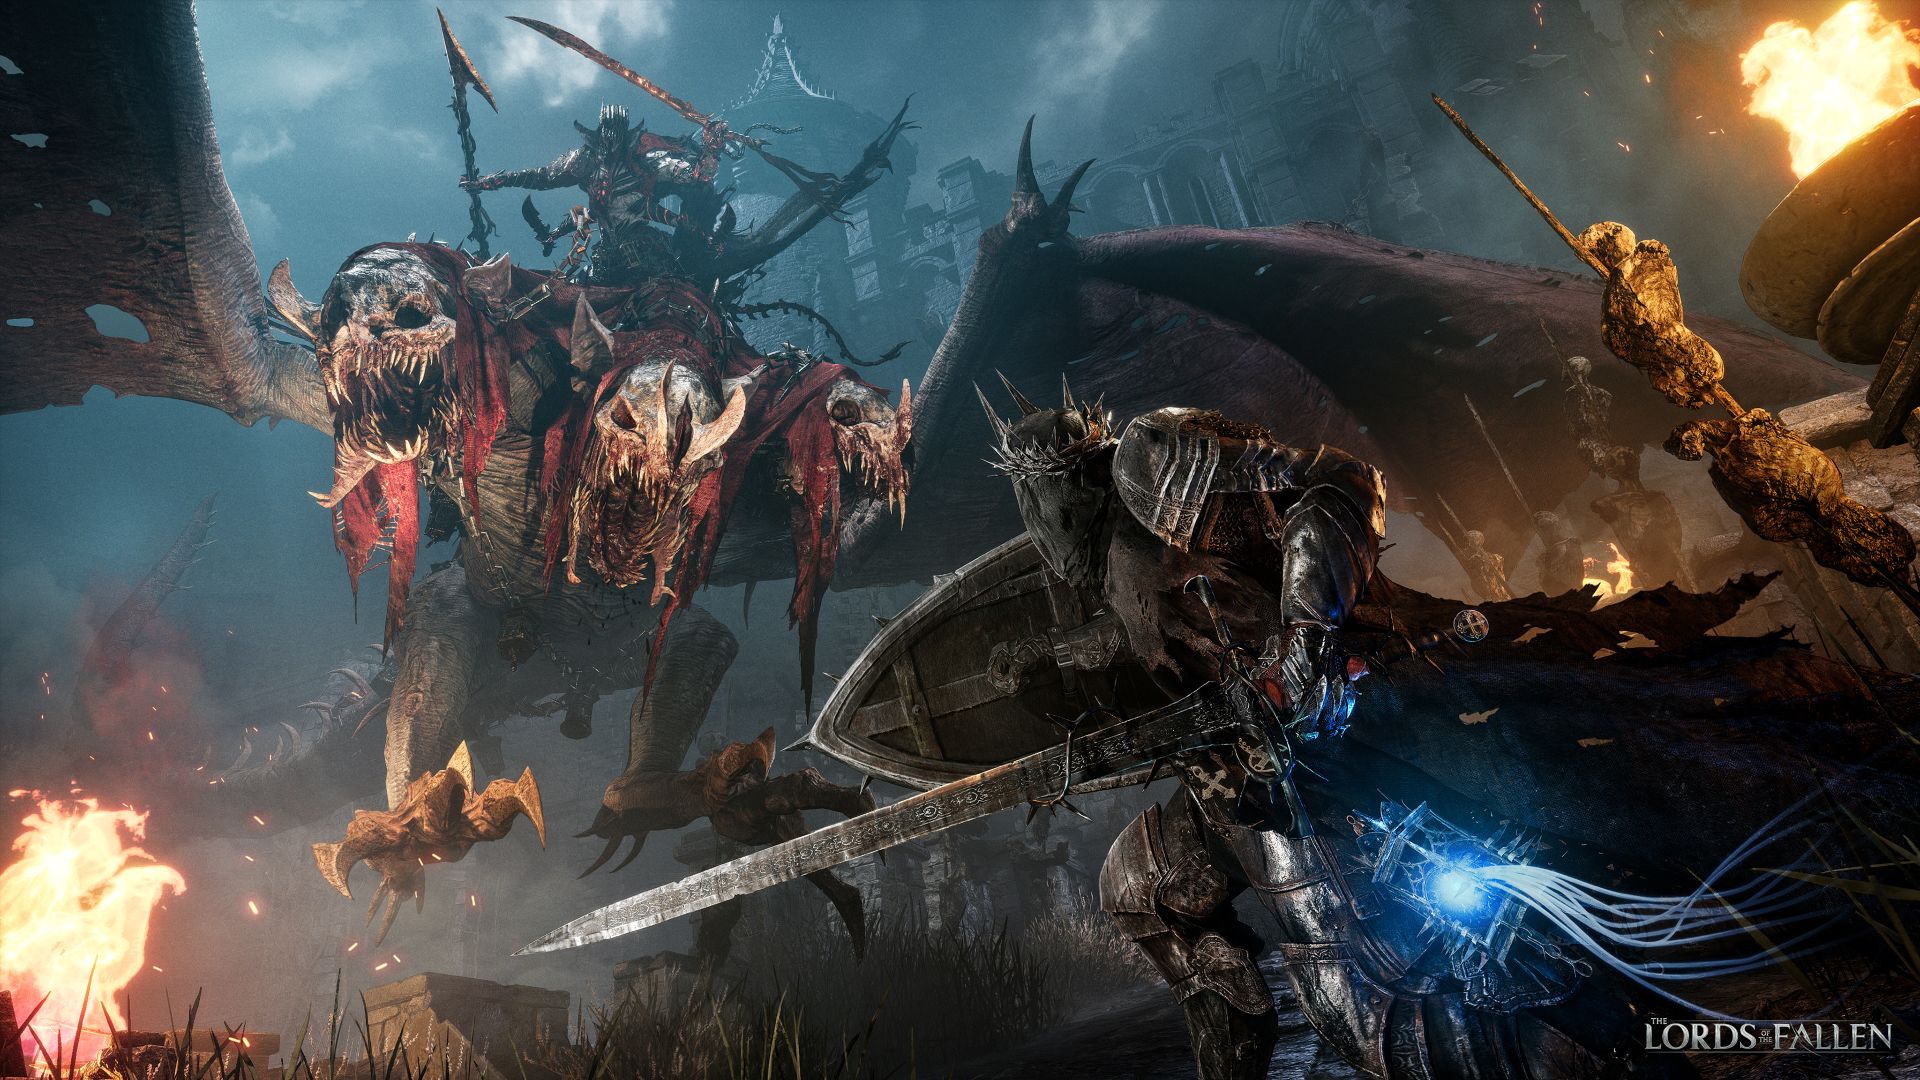 Lords Of The Fallen' on Xbox might not run as intended, suggests